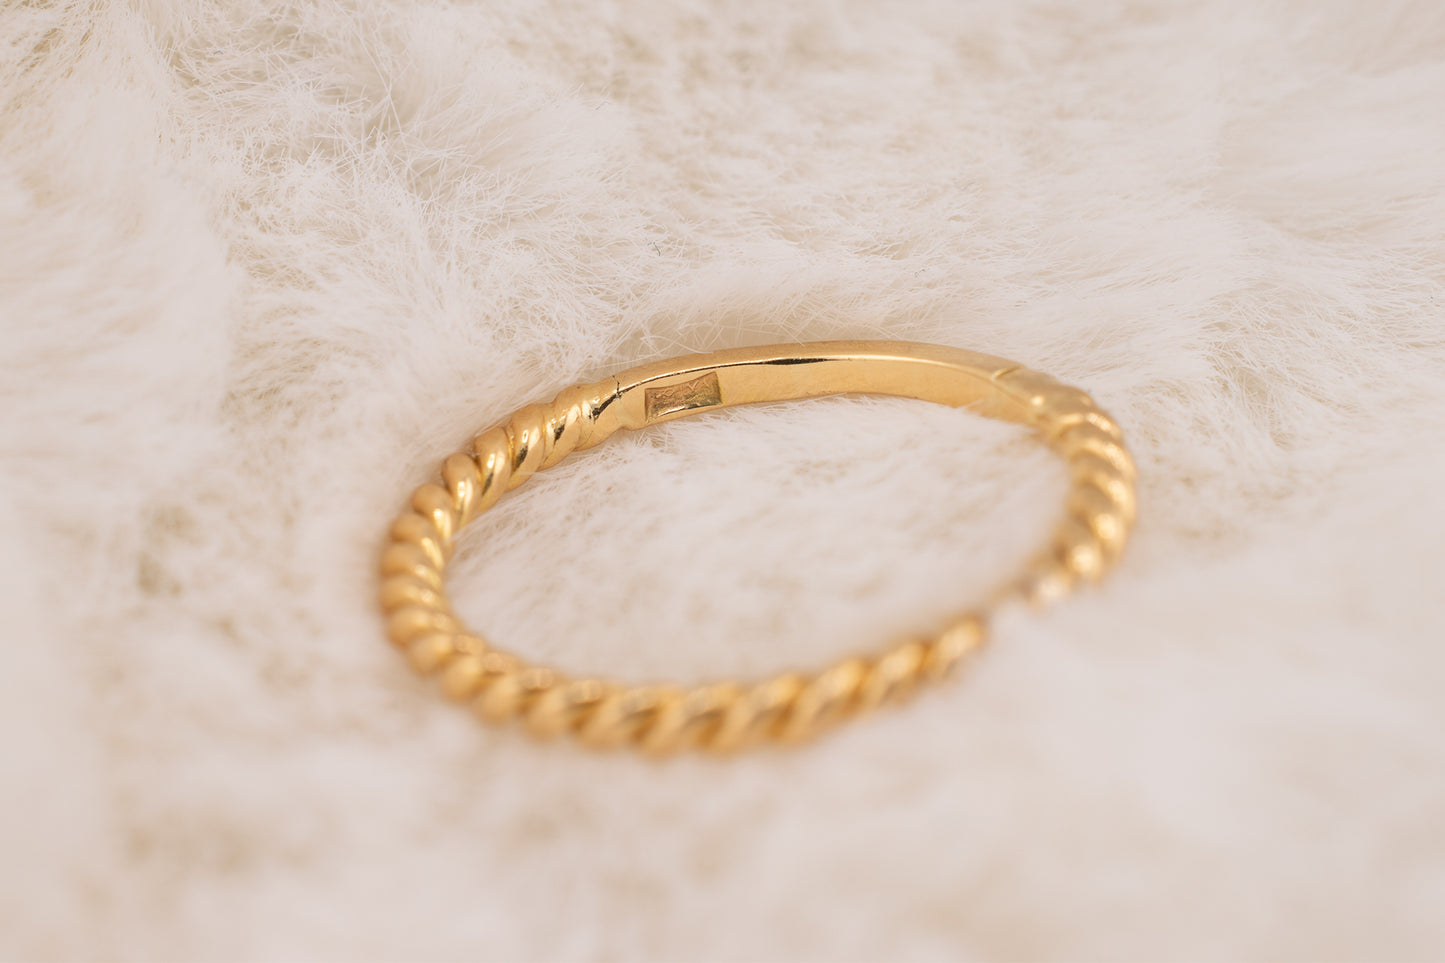 Circa early 2000s Vintage Estate Solid 18 Karat Yellow Gold Minimalist Rope Design Band, Stackable Band, 2mm Size 8.75